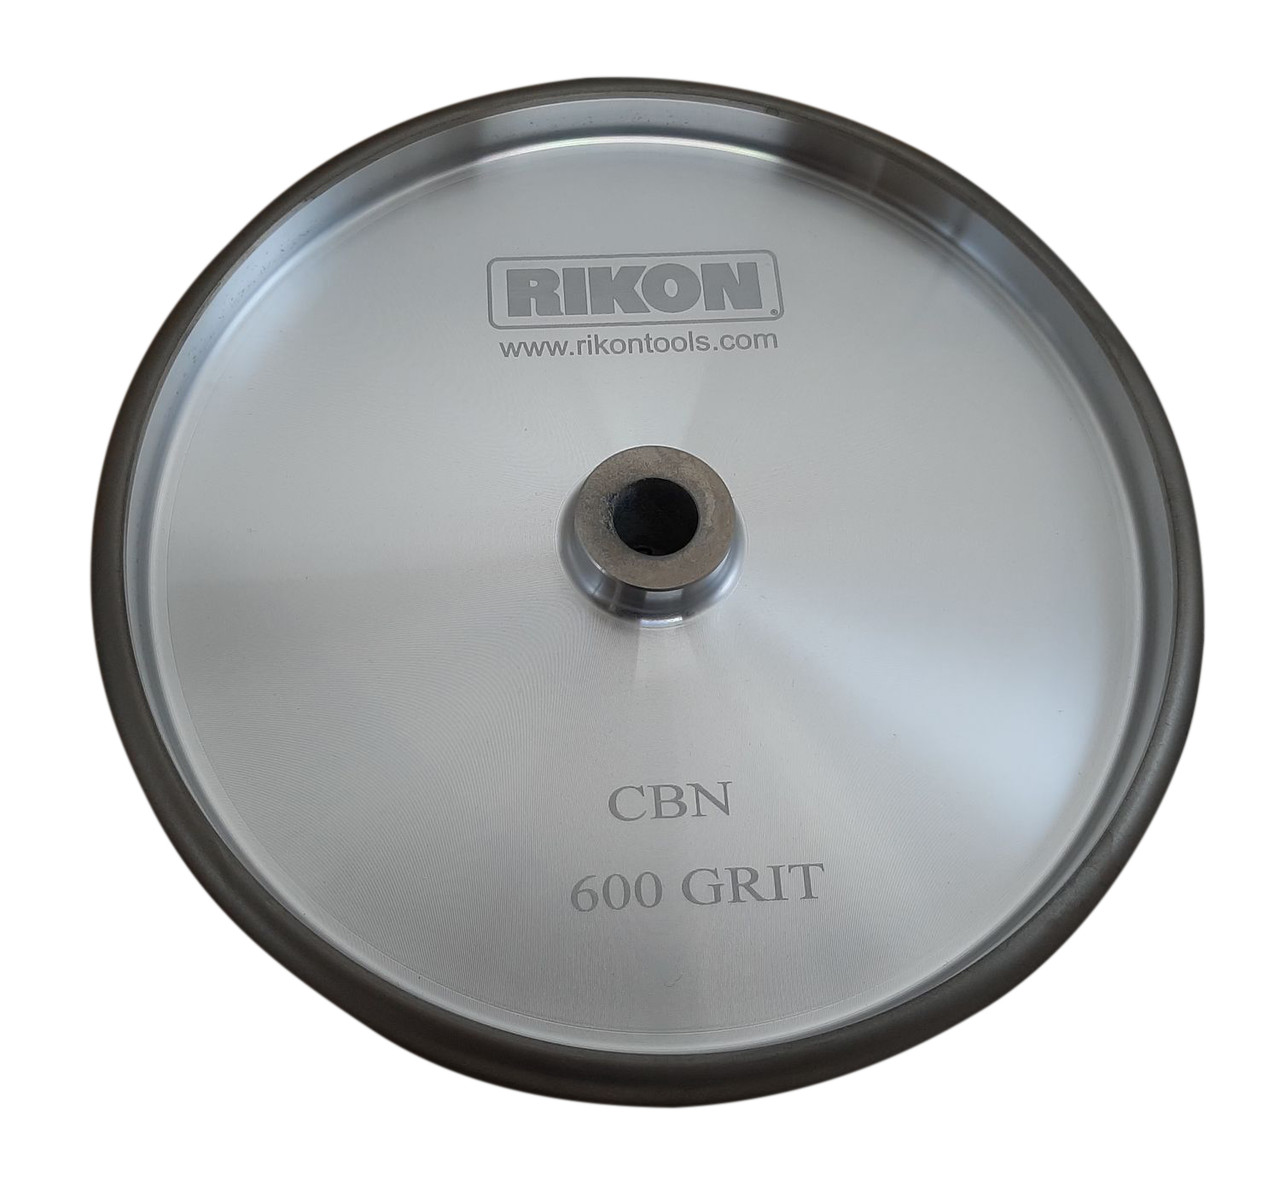 Rikon PRO Series 82-5600R CBN Grinding Wheel 600 Grit 8 inch Wheel 1-1/2 inch wide with Radius to Sharpen High Speed Steel Cutting Tools for your Woodworking Lathe